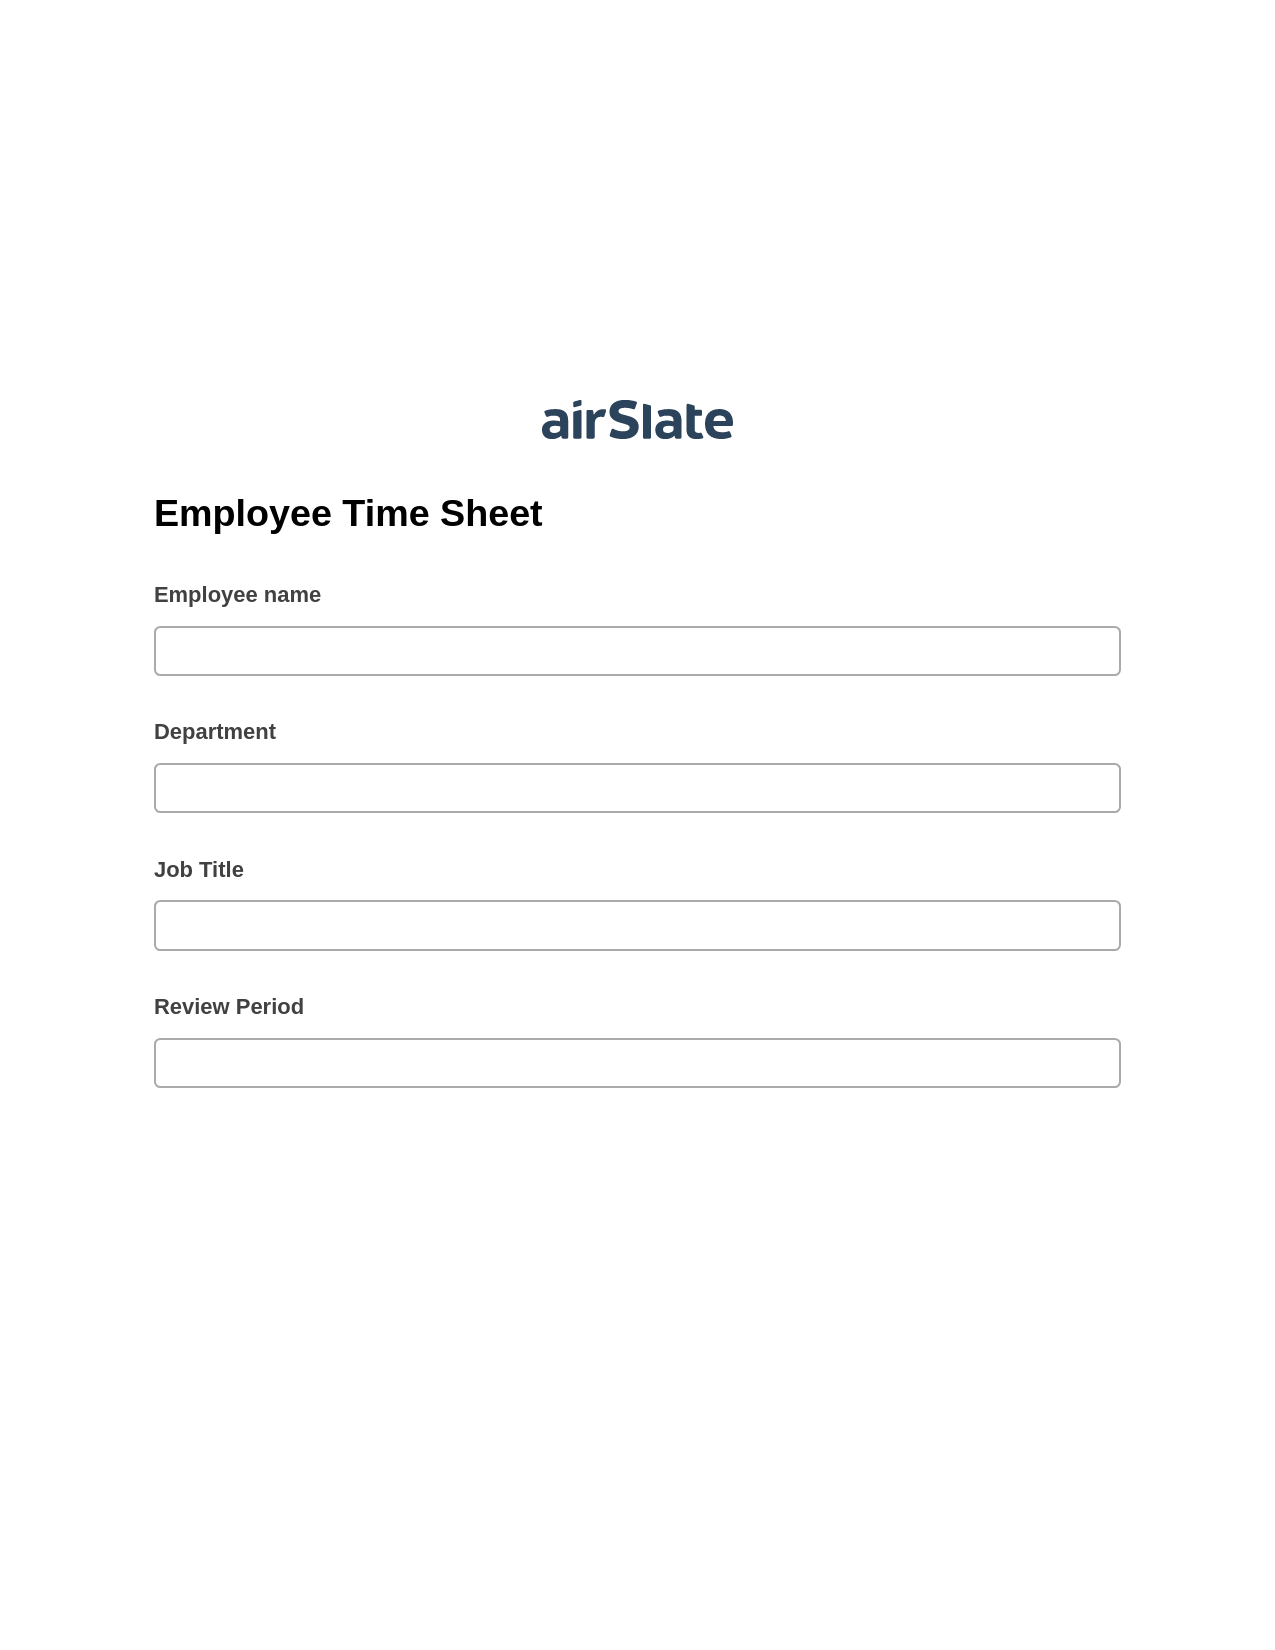 Employee Time Sheet Pre-fill Dropdowns from CSV file Bot, Create Salesforce Records Bot, Archive to Box Bot